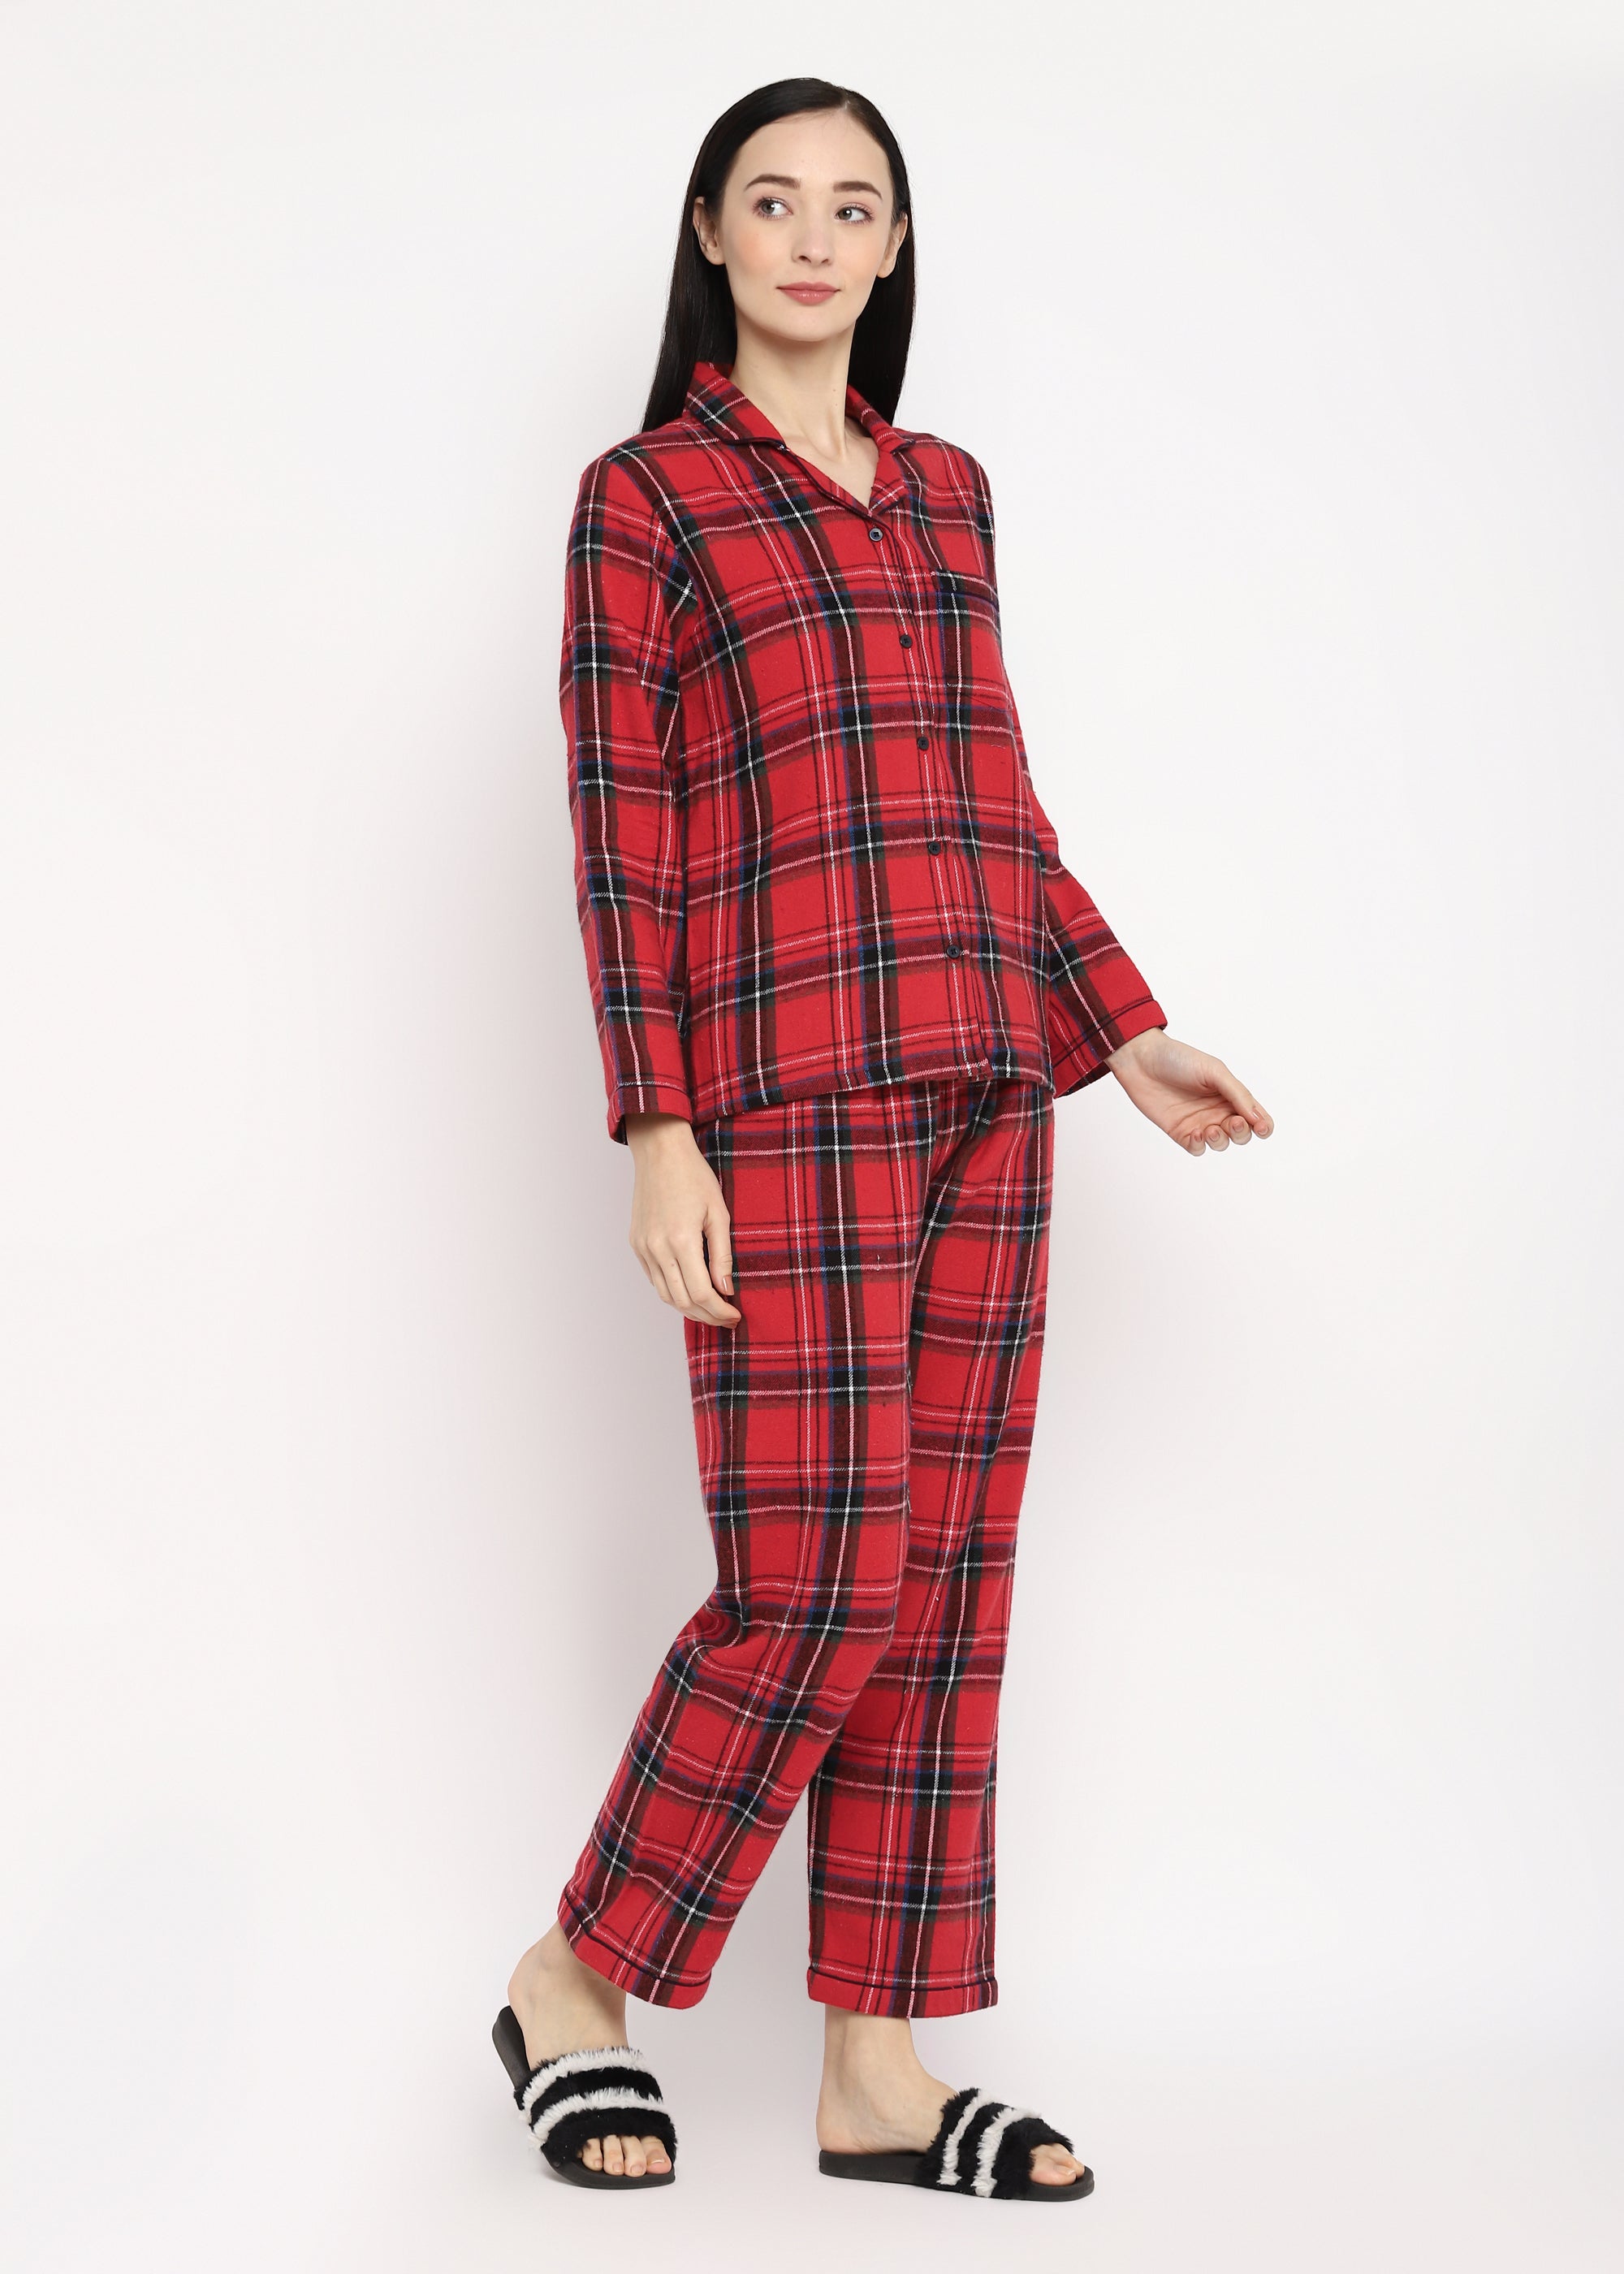 Blue & White Checked Print Cotton Flannel Long Sleeve Women's Night Suit - Shopbloom